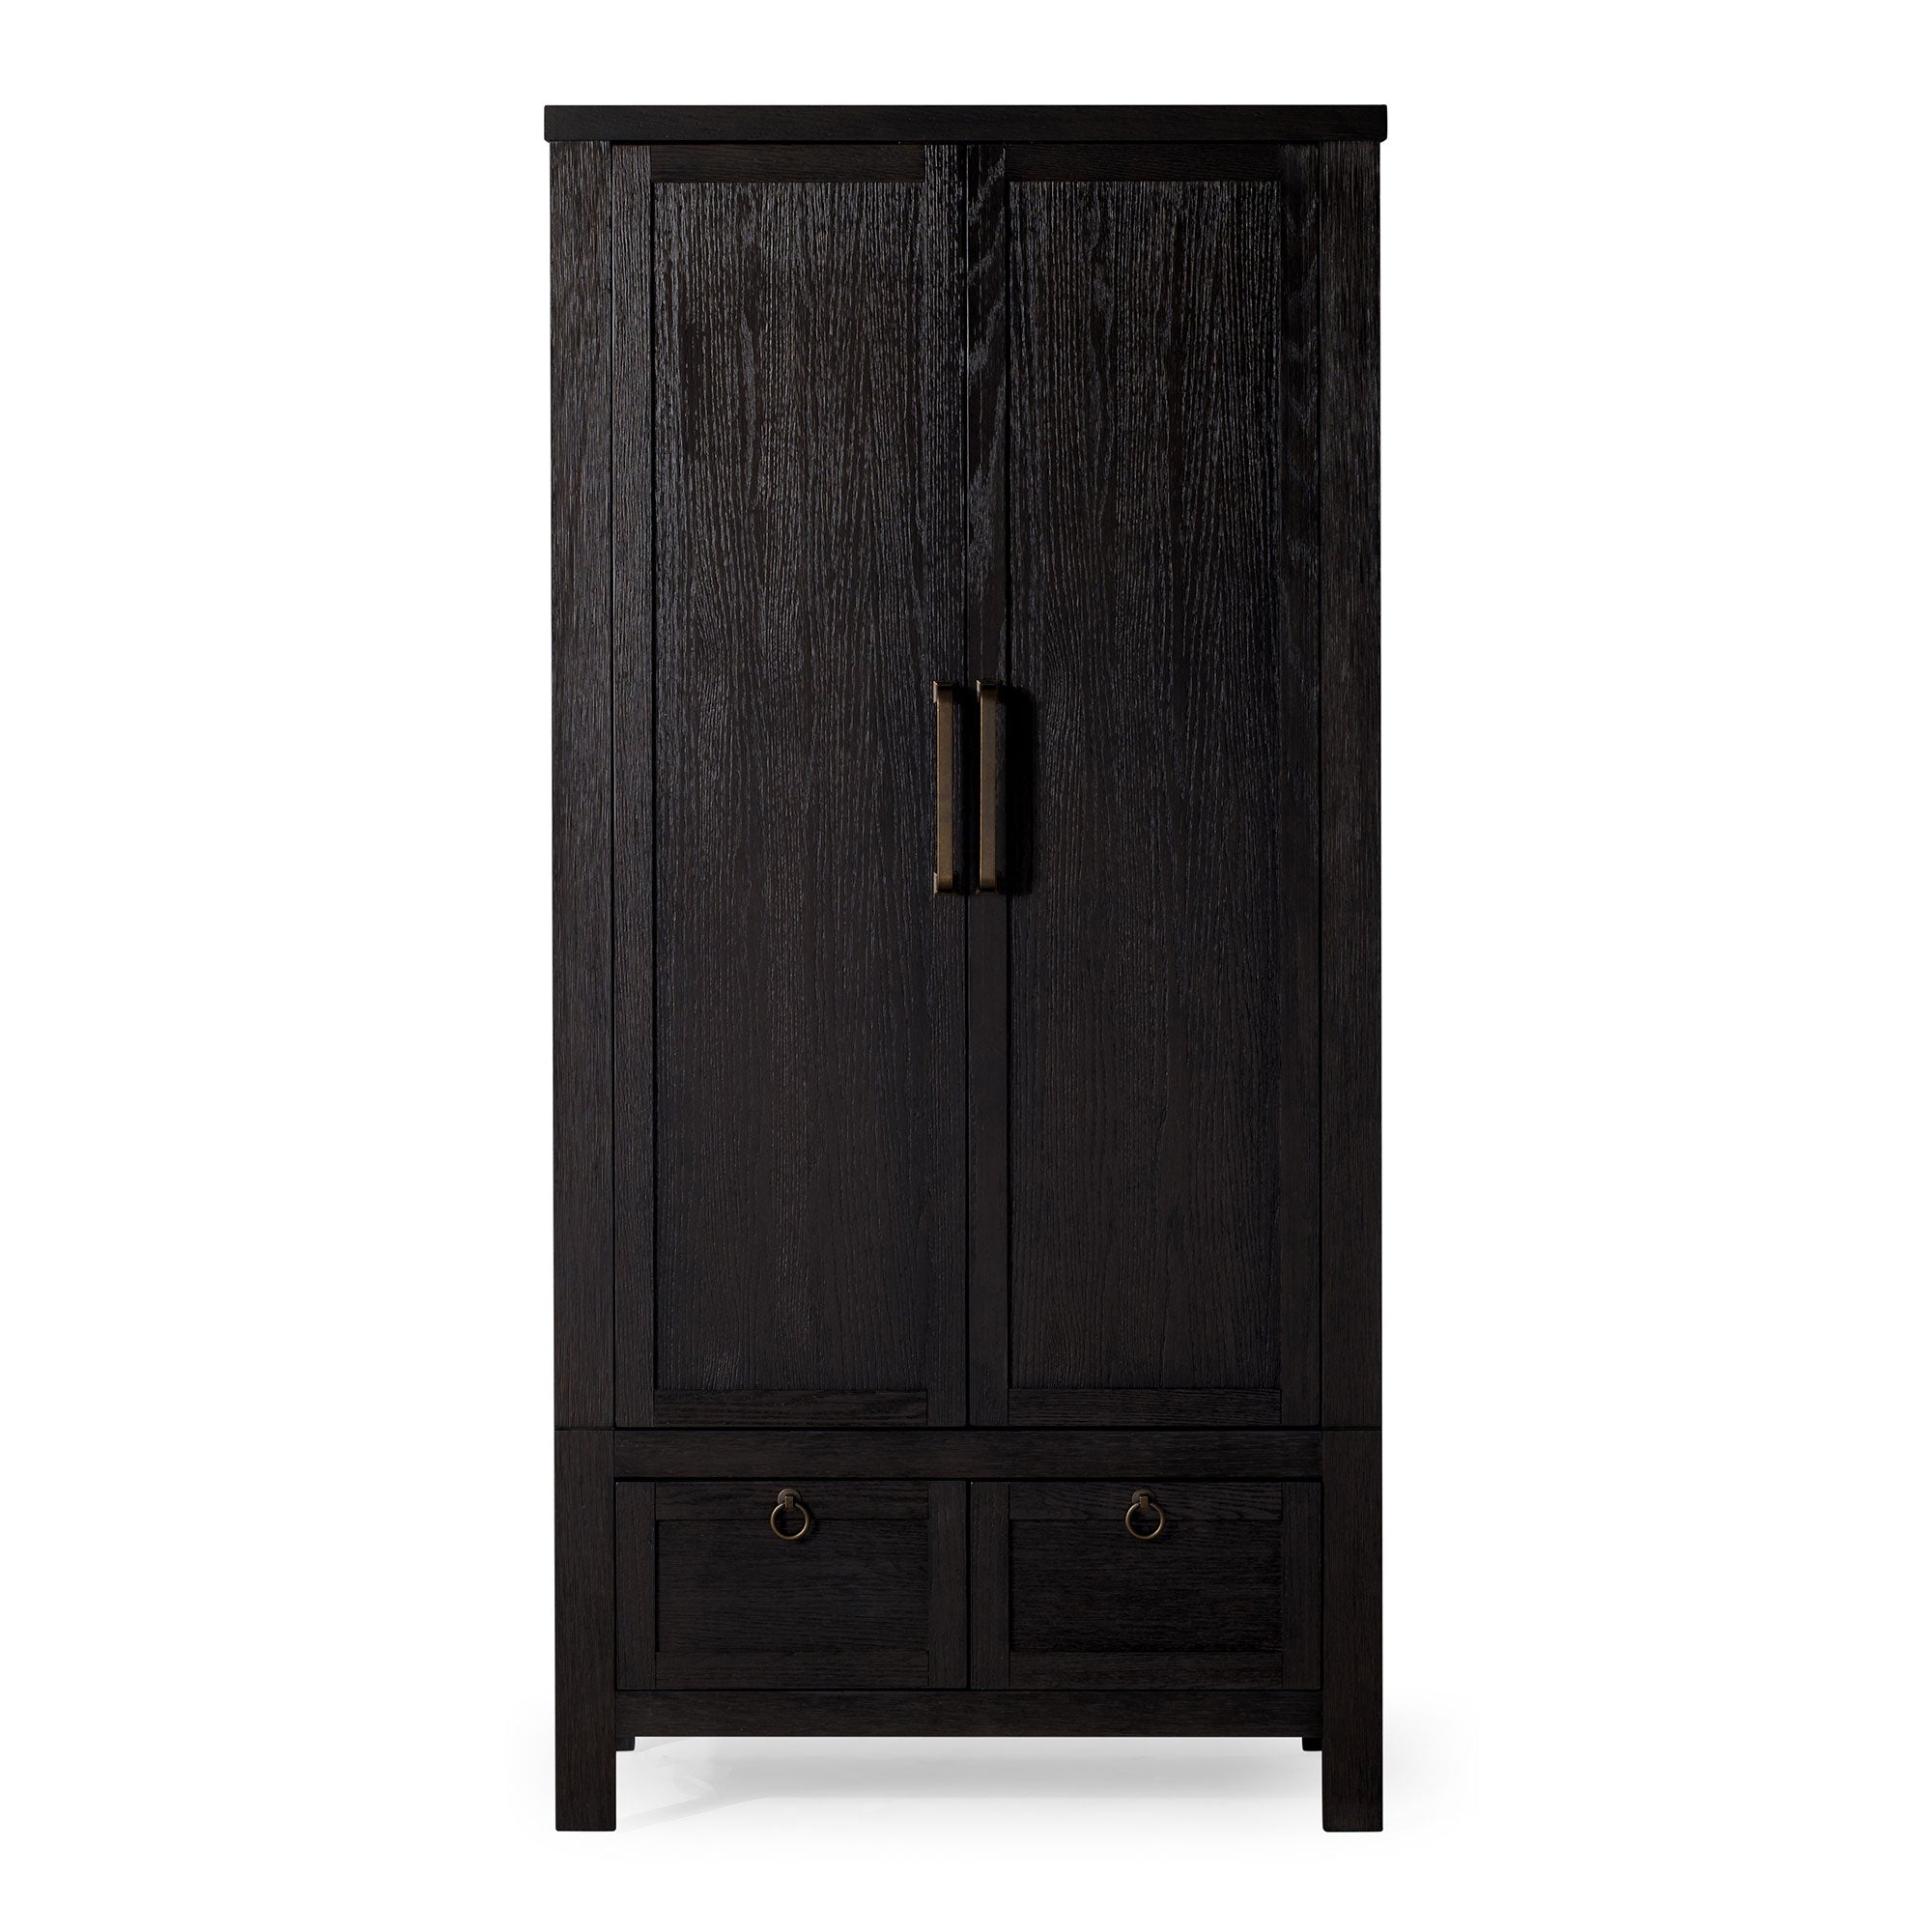 Vaughn Organic Wooden Cabinet in Weathered Black Finish in Cabinets by Maven Lane